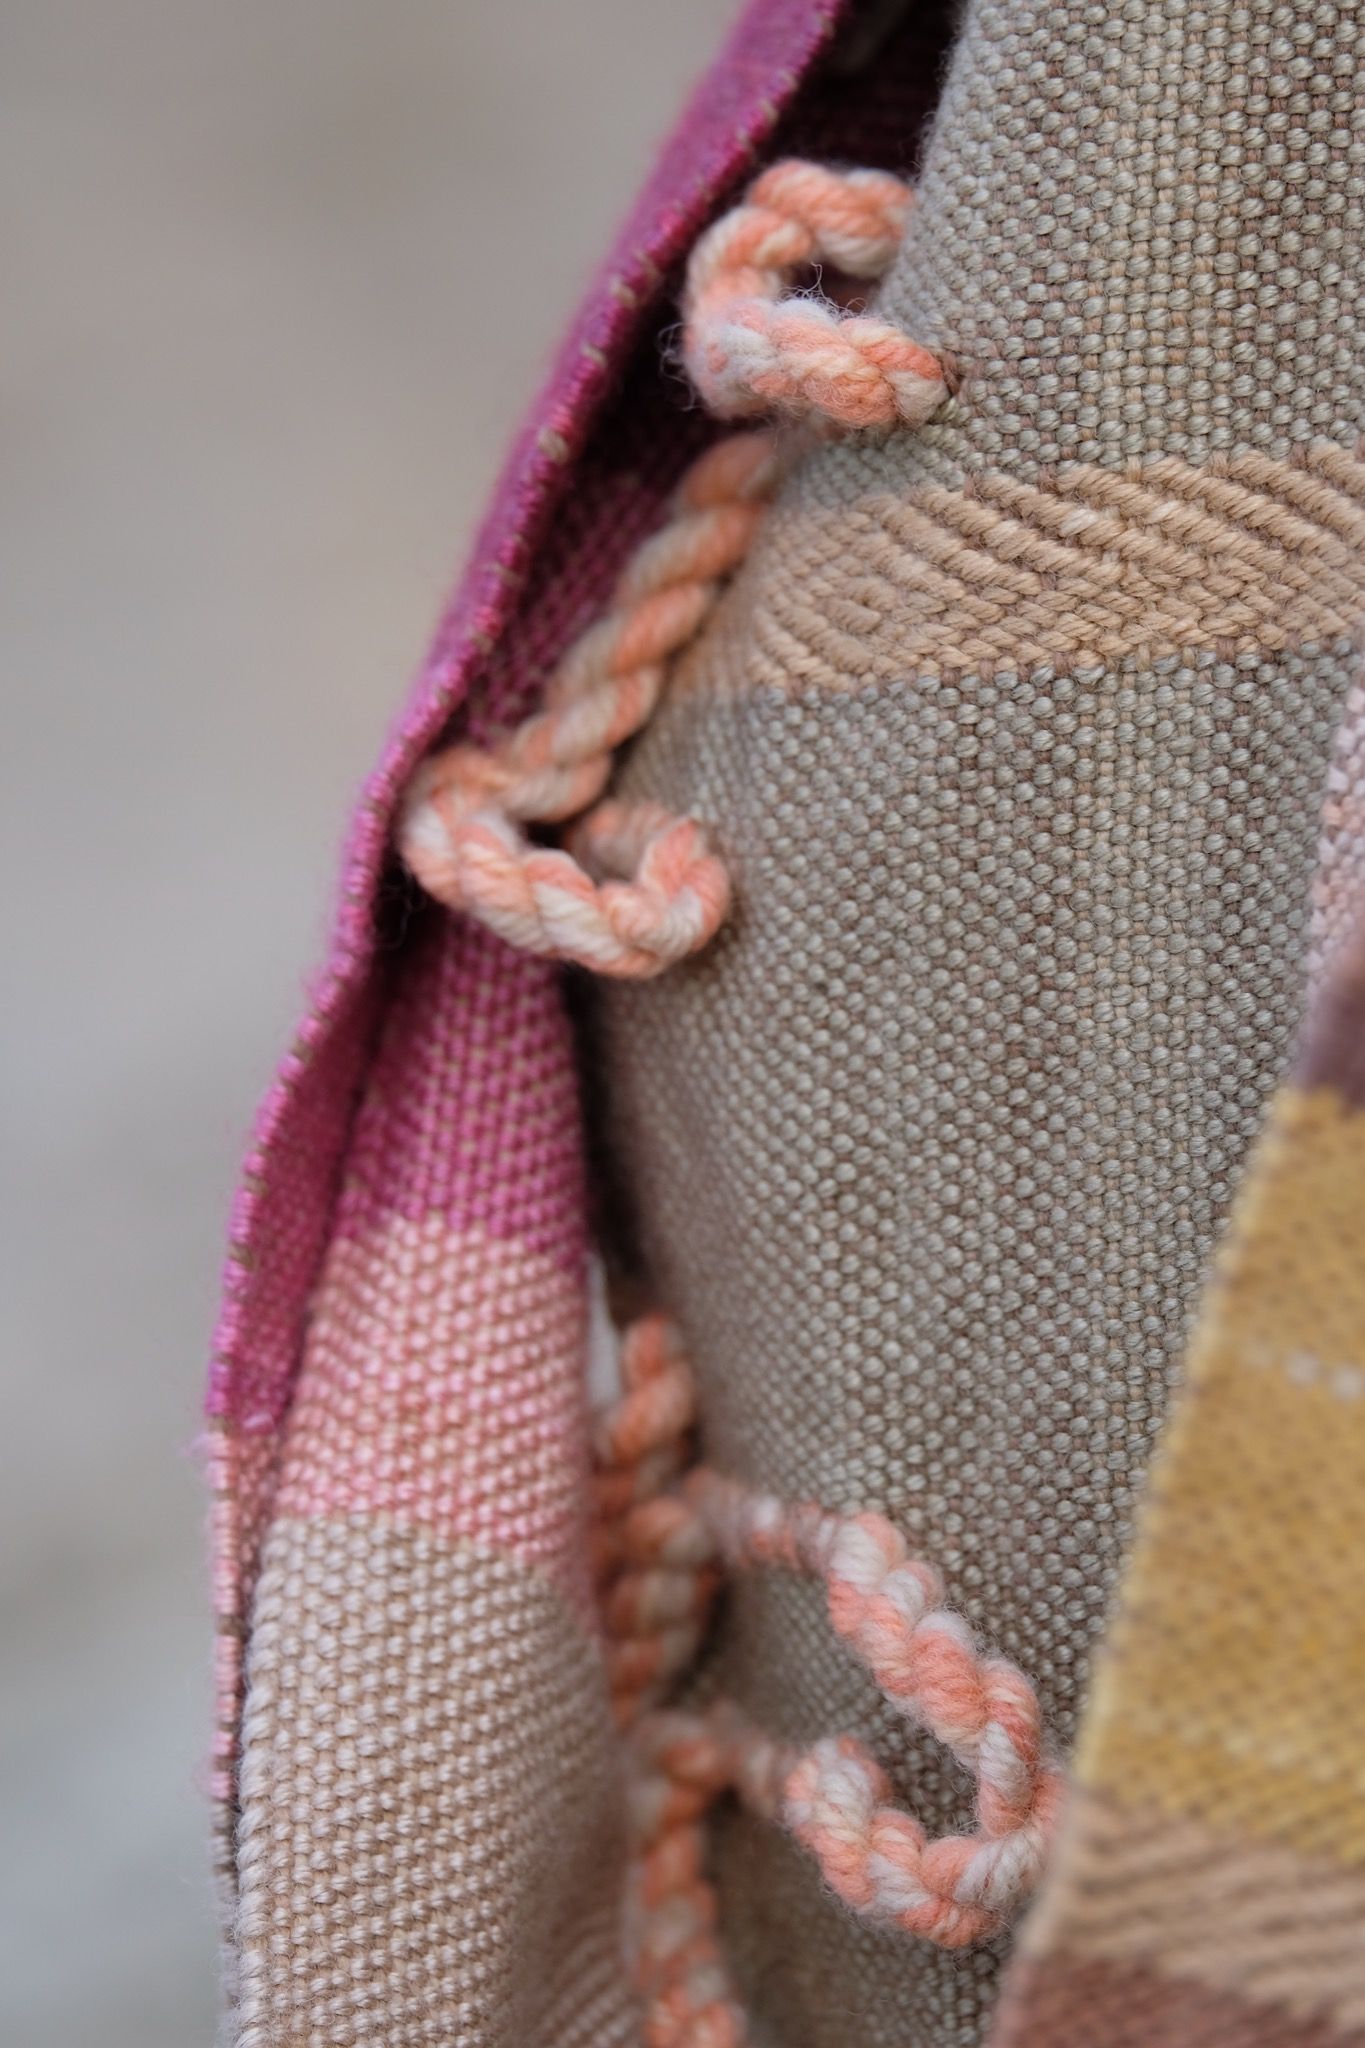 Detail of a naturally dyed brown, white, pink, salmon, yellow and green highly textured scarf on a white mannequin bust in the desert